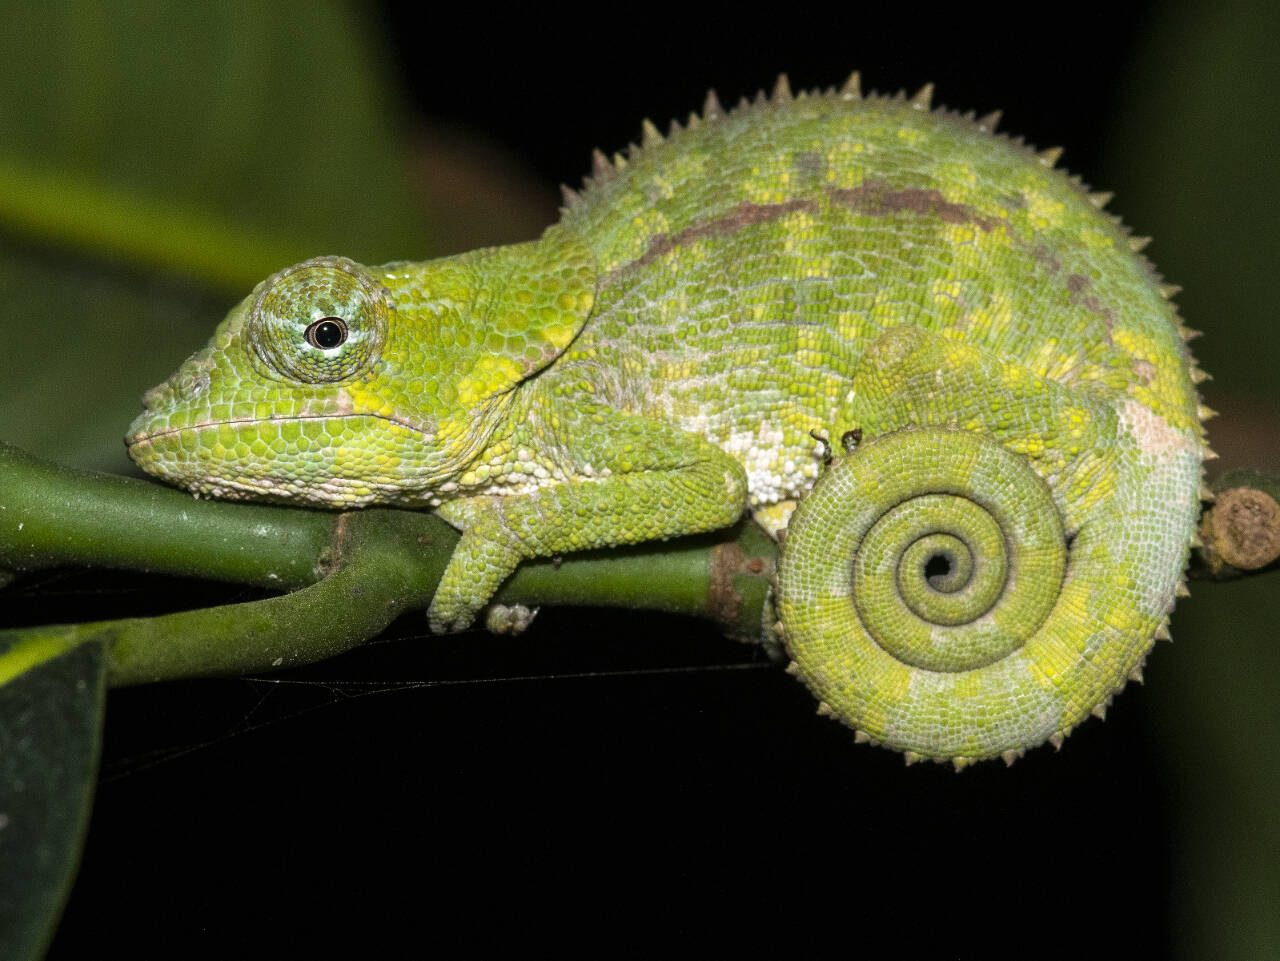 Photo by Ken and Mary Campbell
Warty chameleon is pictured near the Vakona Lodge in Madagascar. Ken and Mary Campbell offer “Madagascar: Island of Lemurs and Other Extraordinary Creatures” at the Feb. 23 Traveler’s Journal presentation in Sequim.